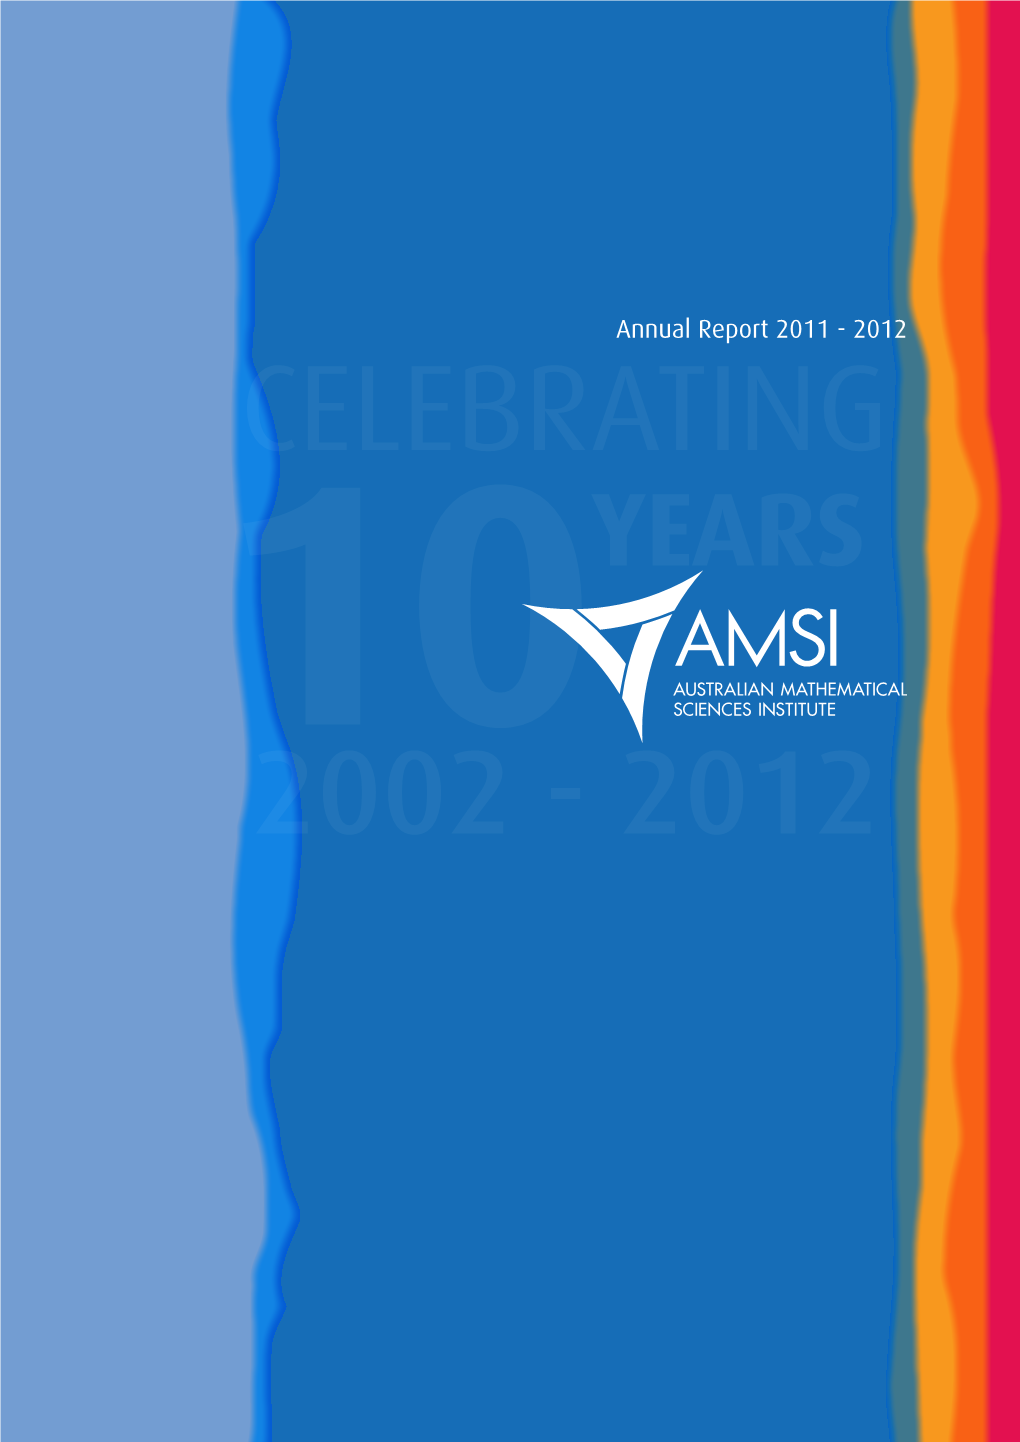 Annual Report 2011 ‑ 2012 CELEBRATING YEARS